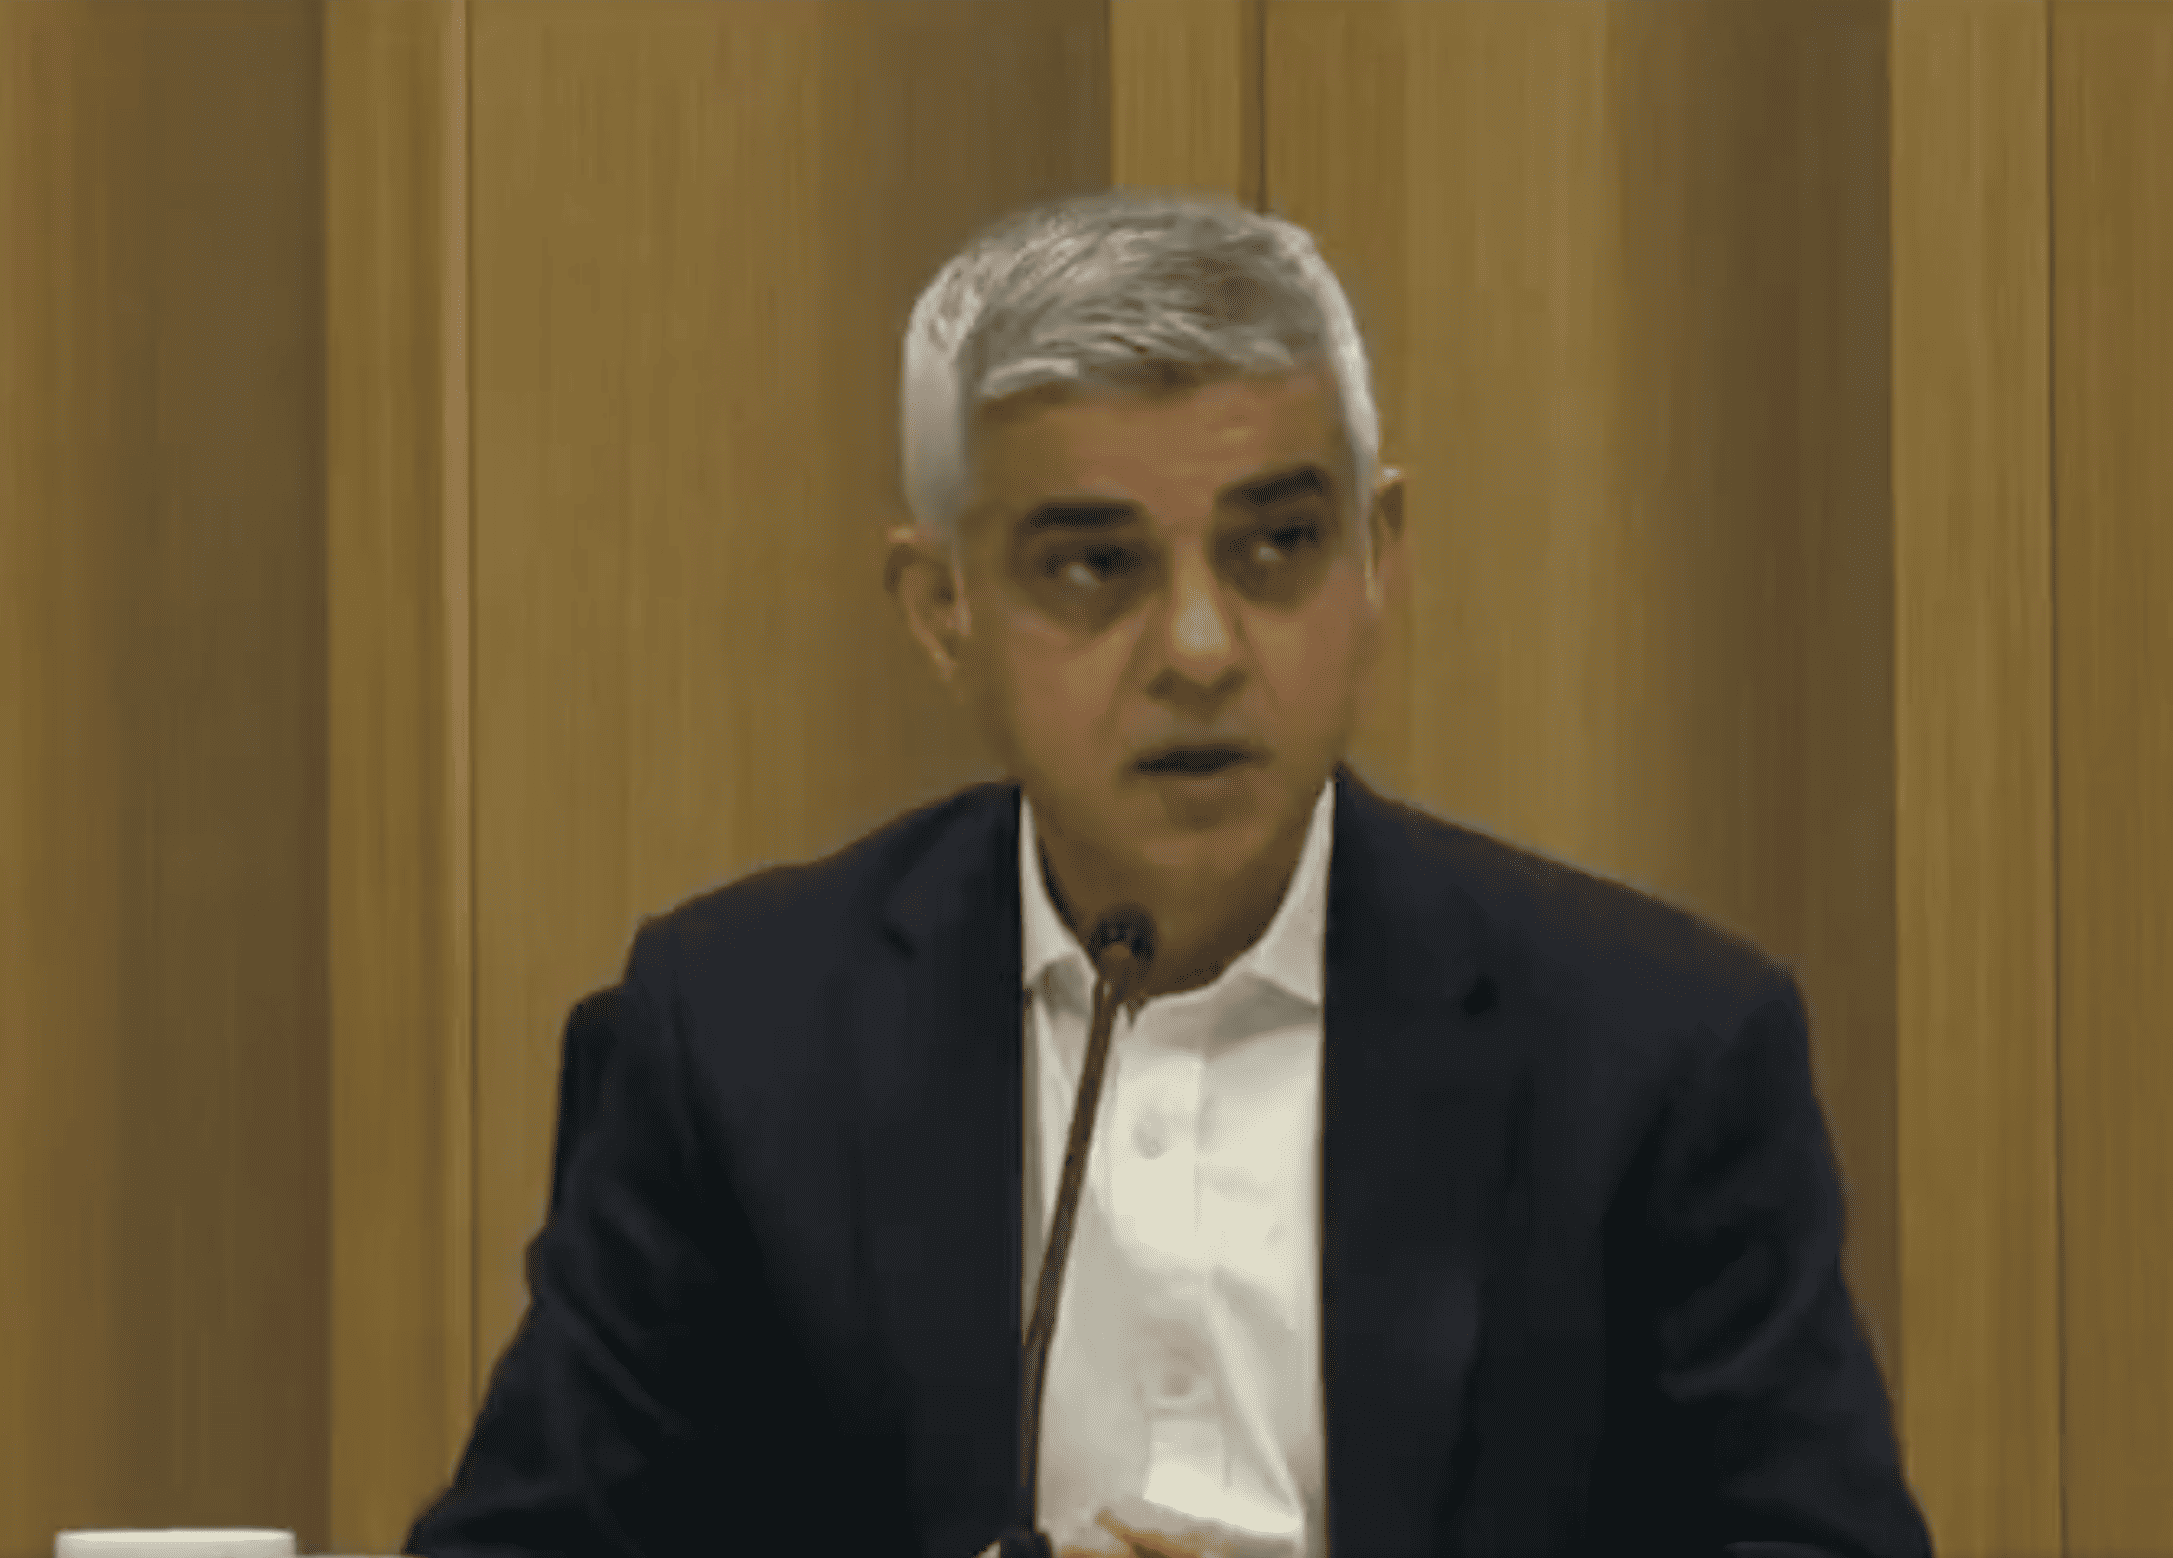 London Assembly suspended after Sadiq Khan heckled and item thrown from public gallery